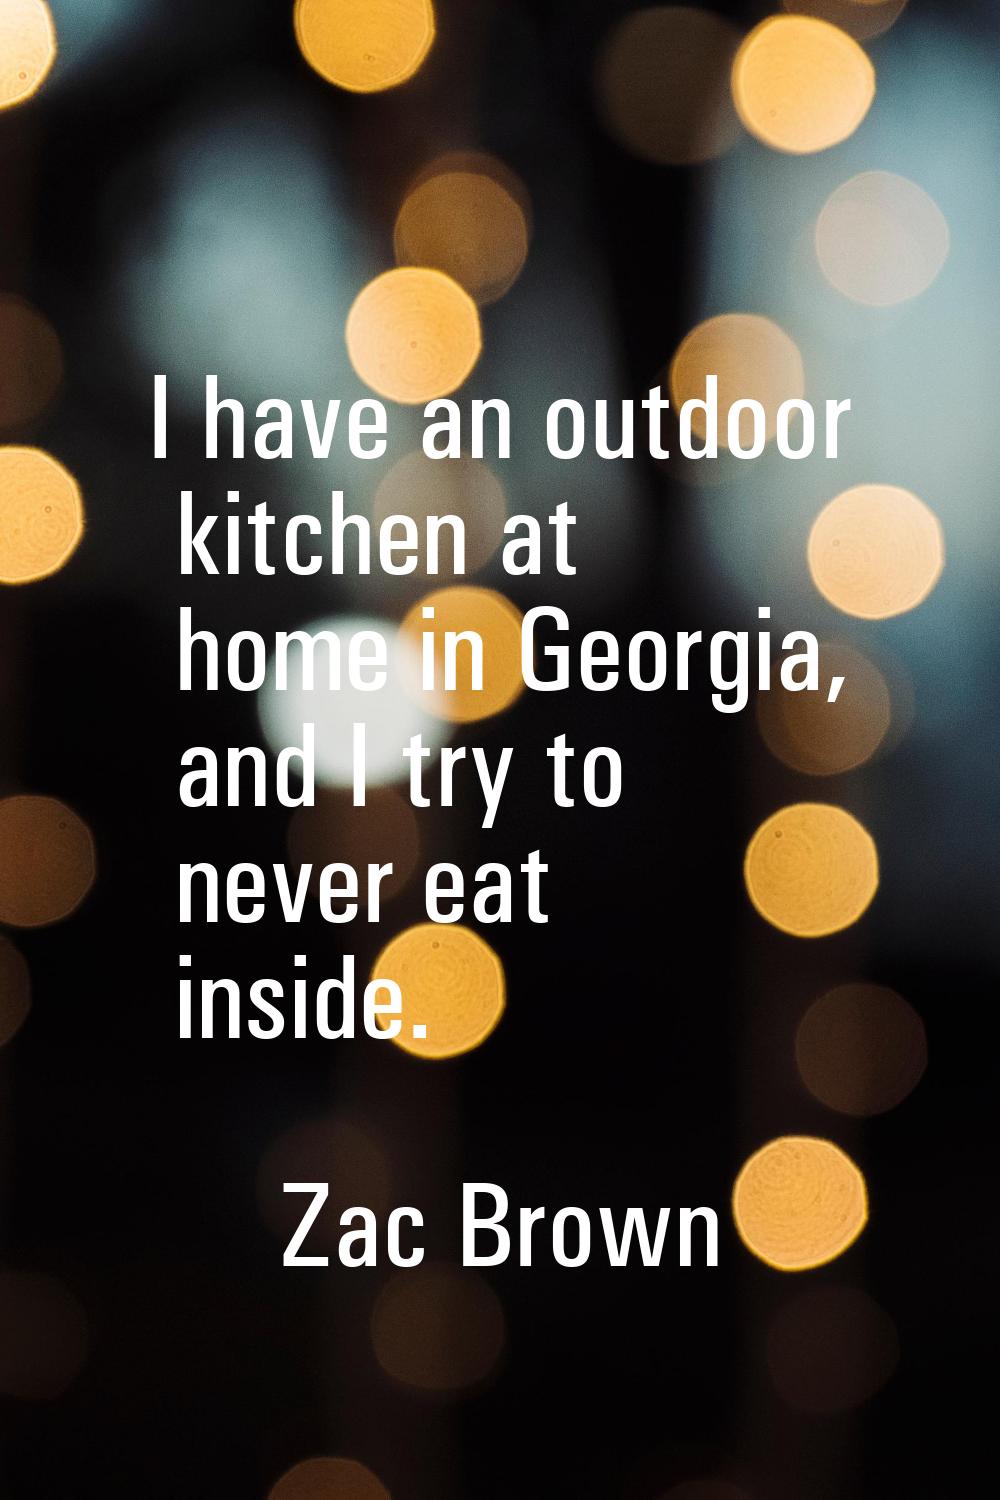 I have an outdoor kitchen at home in Georgia, and I try to never eat inside.